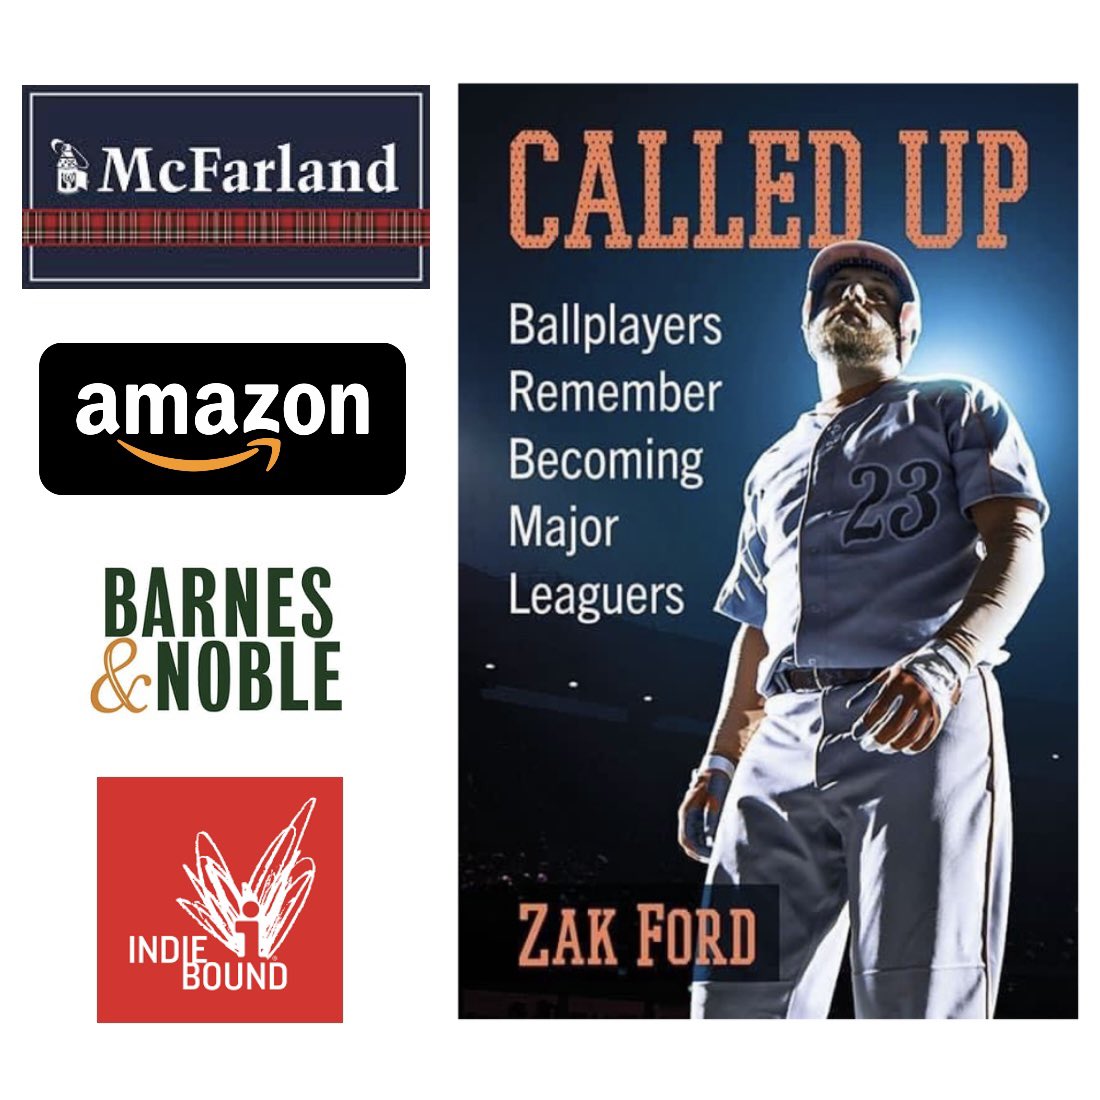 If you’ve enjoyed any of the recent viral videos about players making Opening Day rosters or playing in their MLB debuts, you’ll love the “Called Up” book. It captures 109 first-person player stories about become major leaguers.